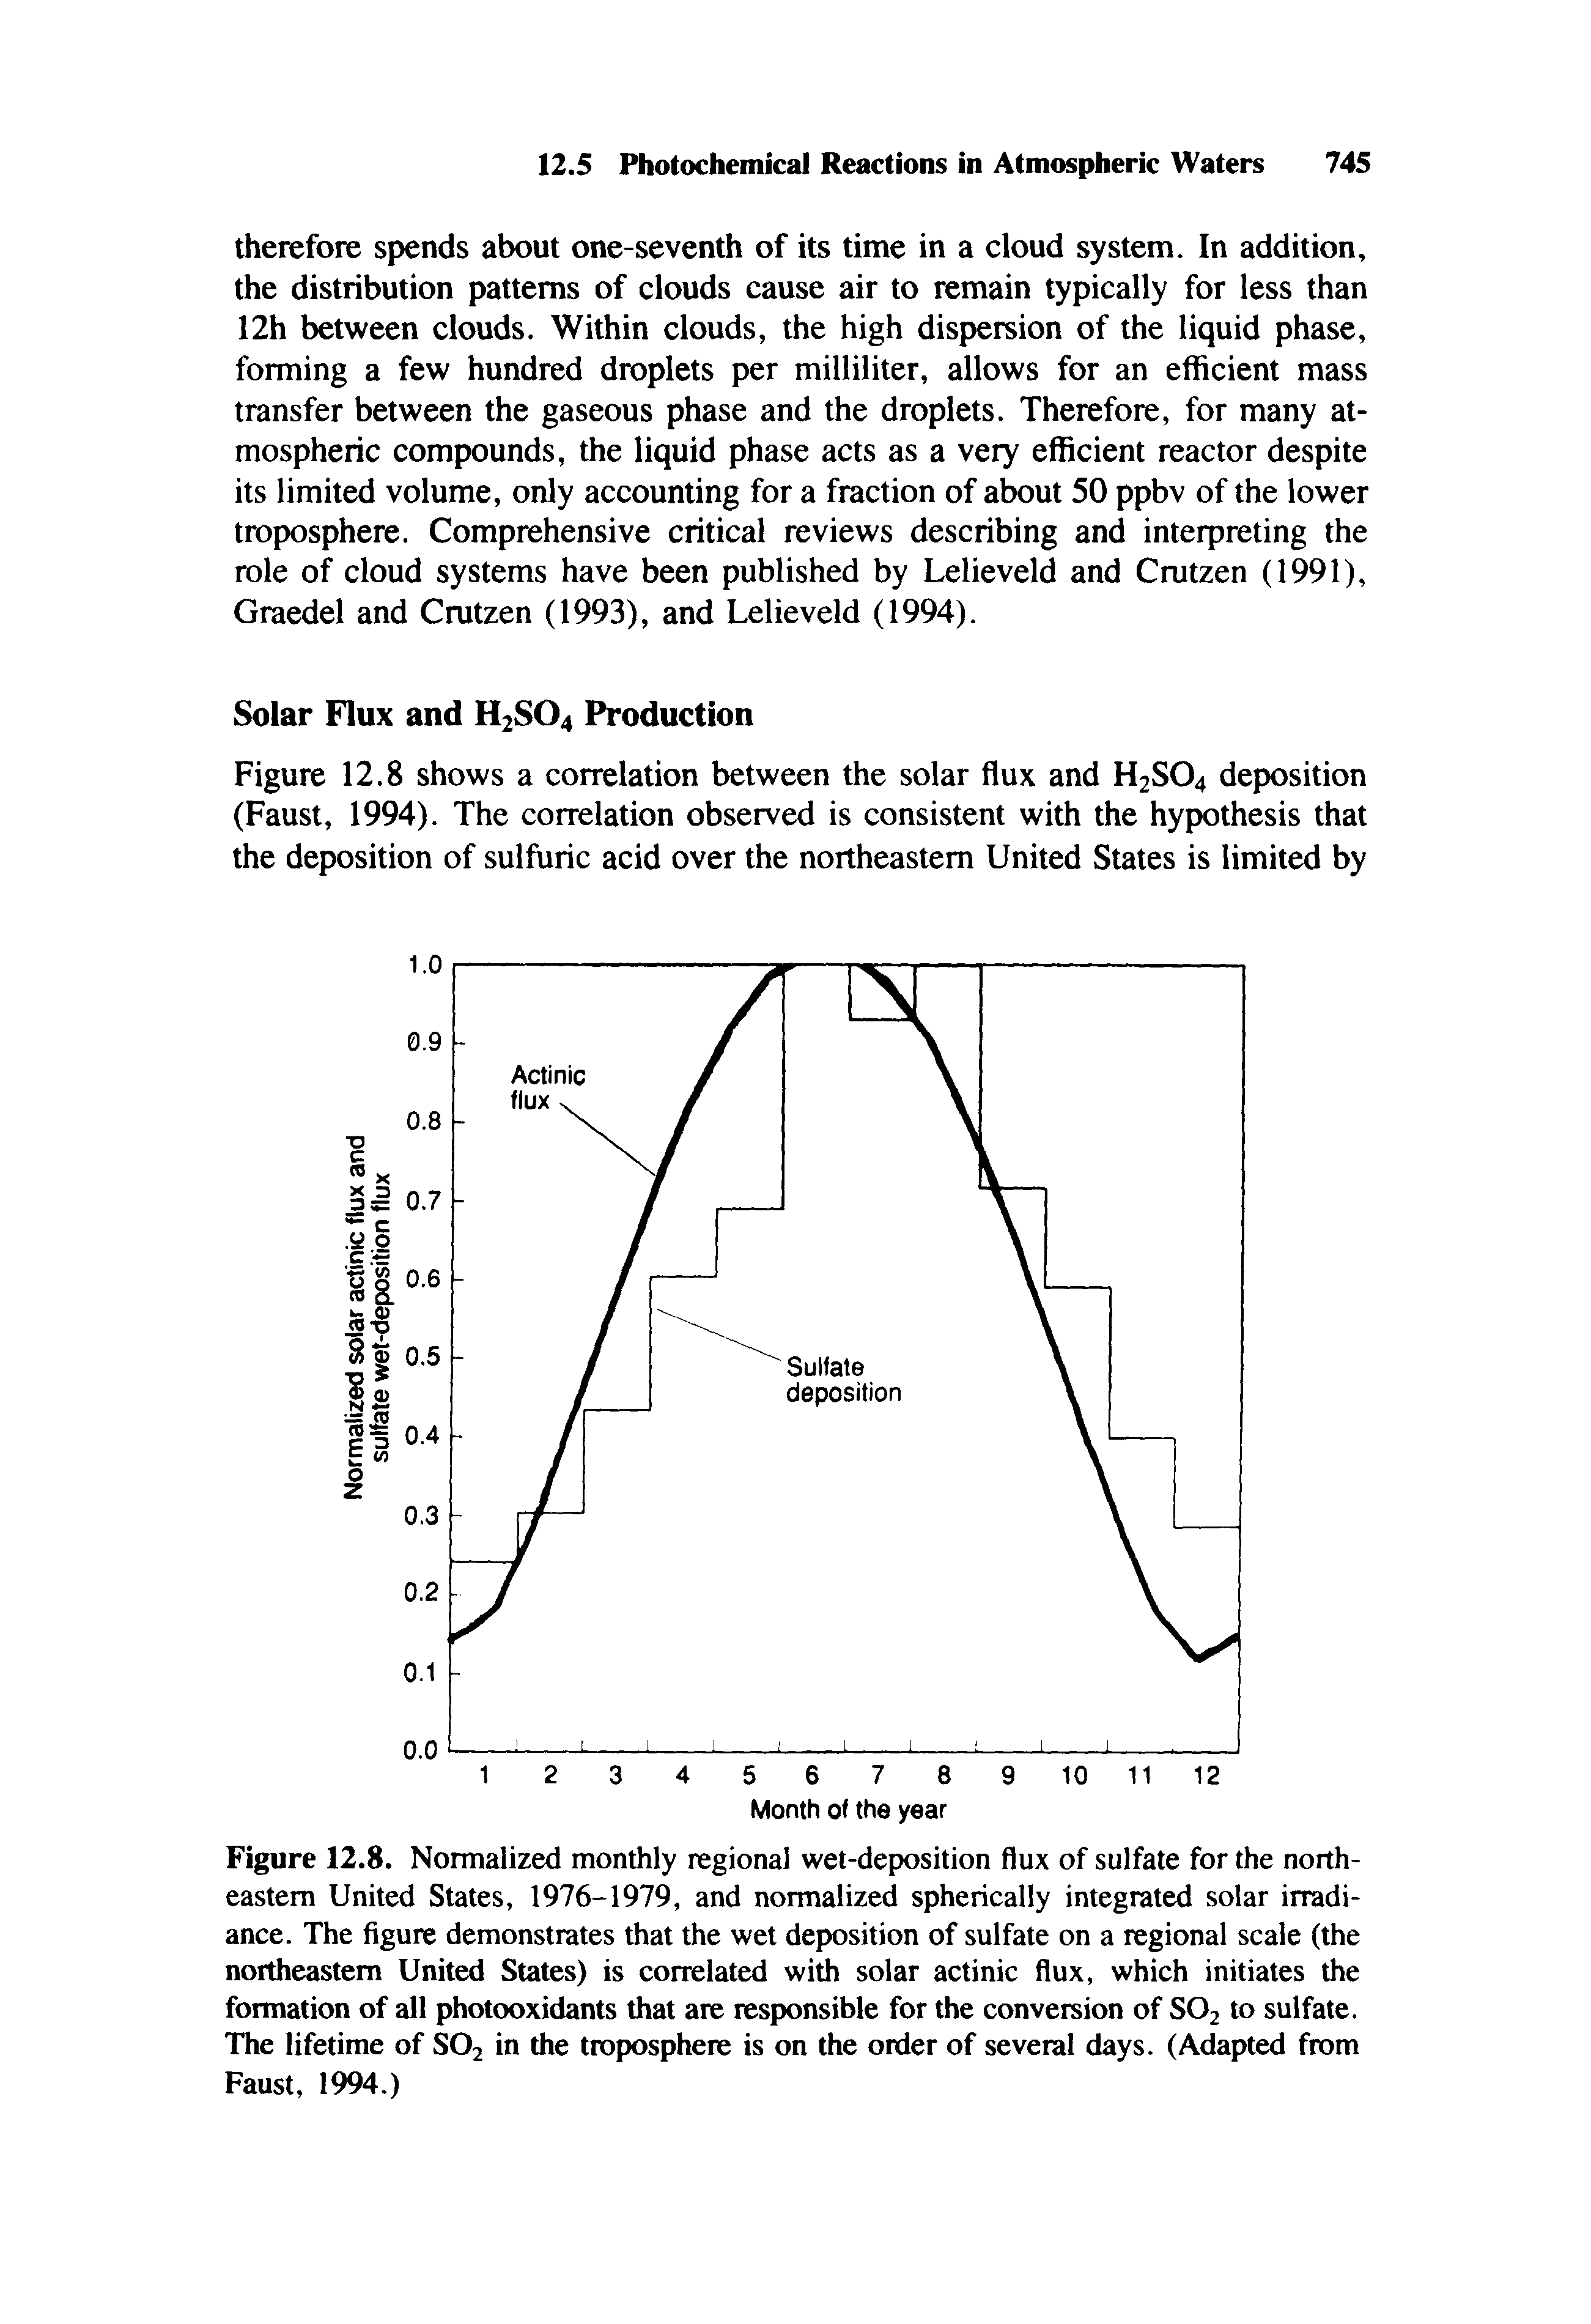 Figure 12.8. Normalized monthly regional wet-deposition flux of sulfate for the northeastern United States, 1976-1979, and normalized spherically integrated solar irradi-ance. The figure demonstrates that the wet deposition of sulfate on a regional scale (the northeastern United States) is correlated with solar actinic flux, which initiates the formation of all photooxidants that are responsible for the conversion of SO2 to sulfate. The lifetime of SO2 in the troposphere is on the order of several days. (Adapted from Faust, 1994.)...